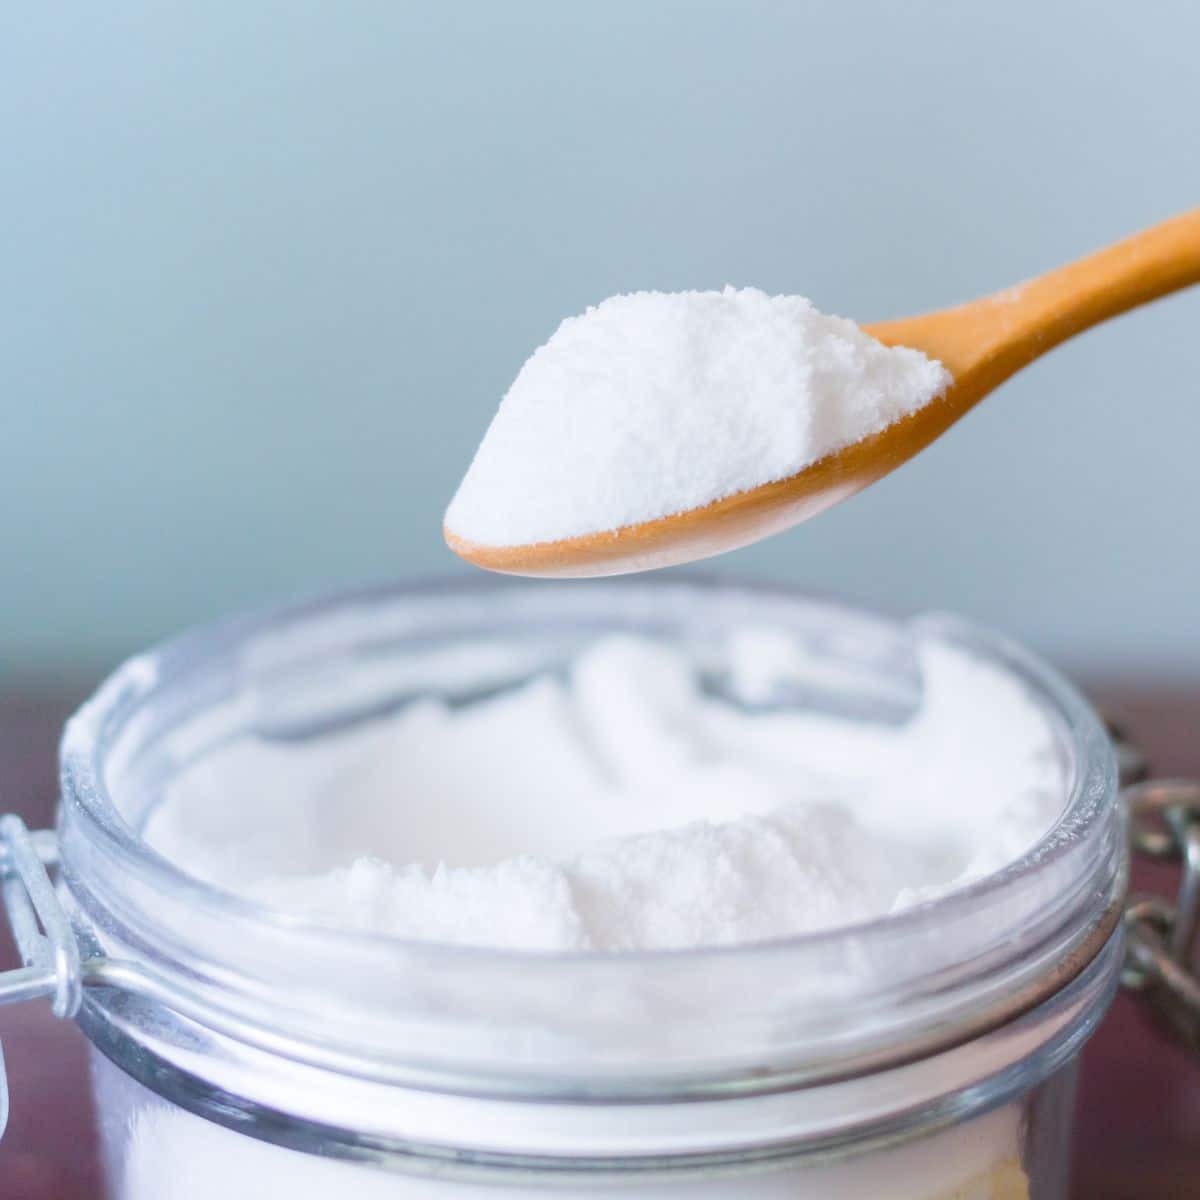 Wooden spoon holding homemade dishwasher detergent above glass jar filled with detergent.